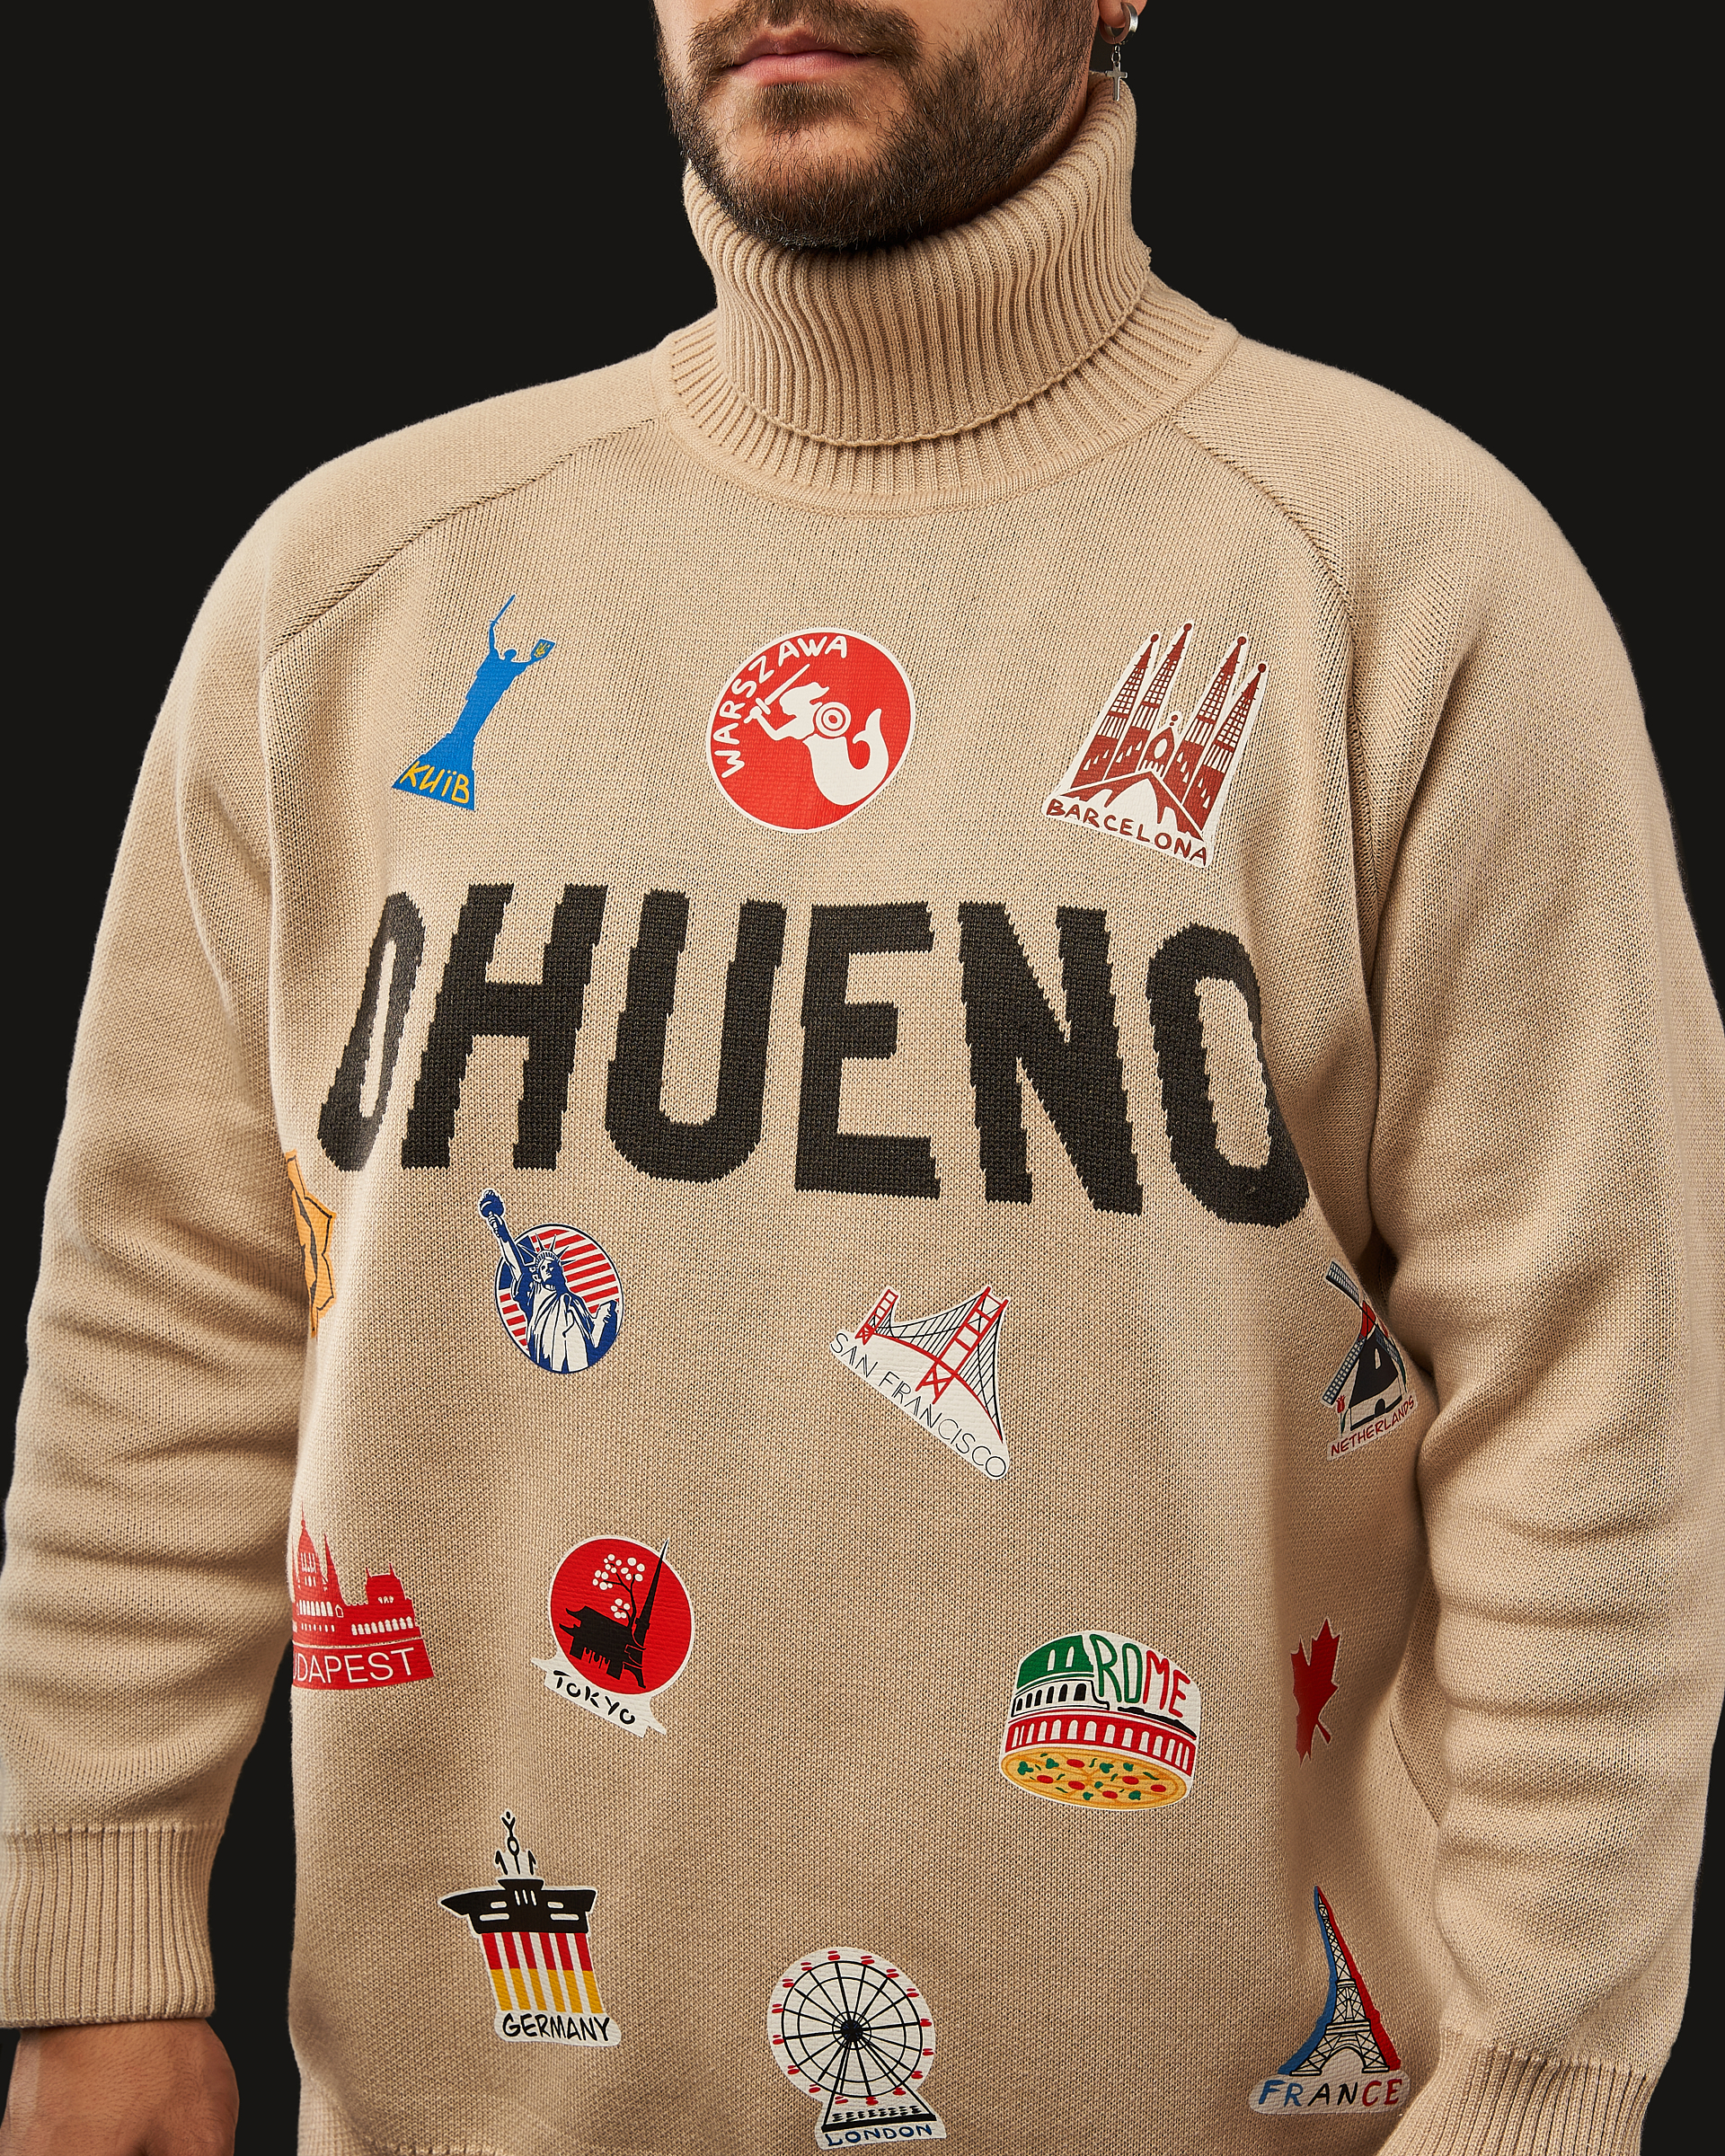 Pullover (beige) Image: https://ohueno-official.com/wp-content/uploads/m01953.jpg